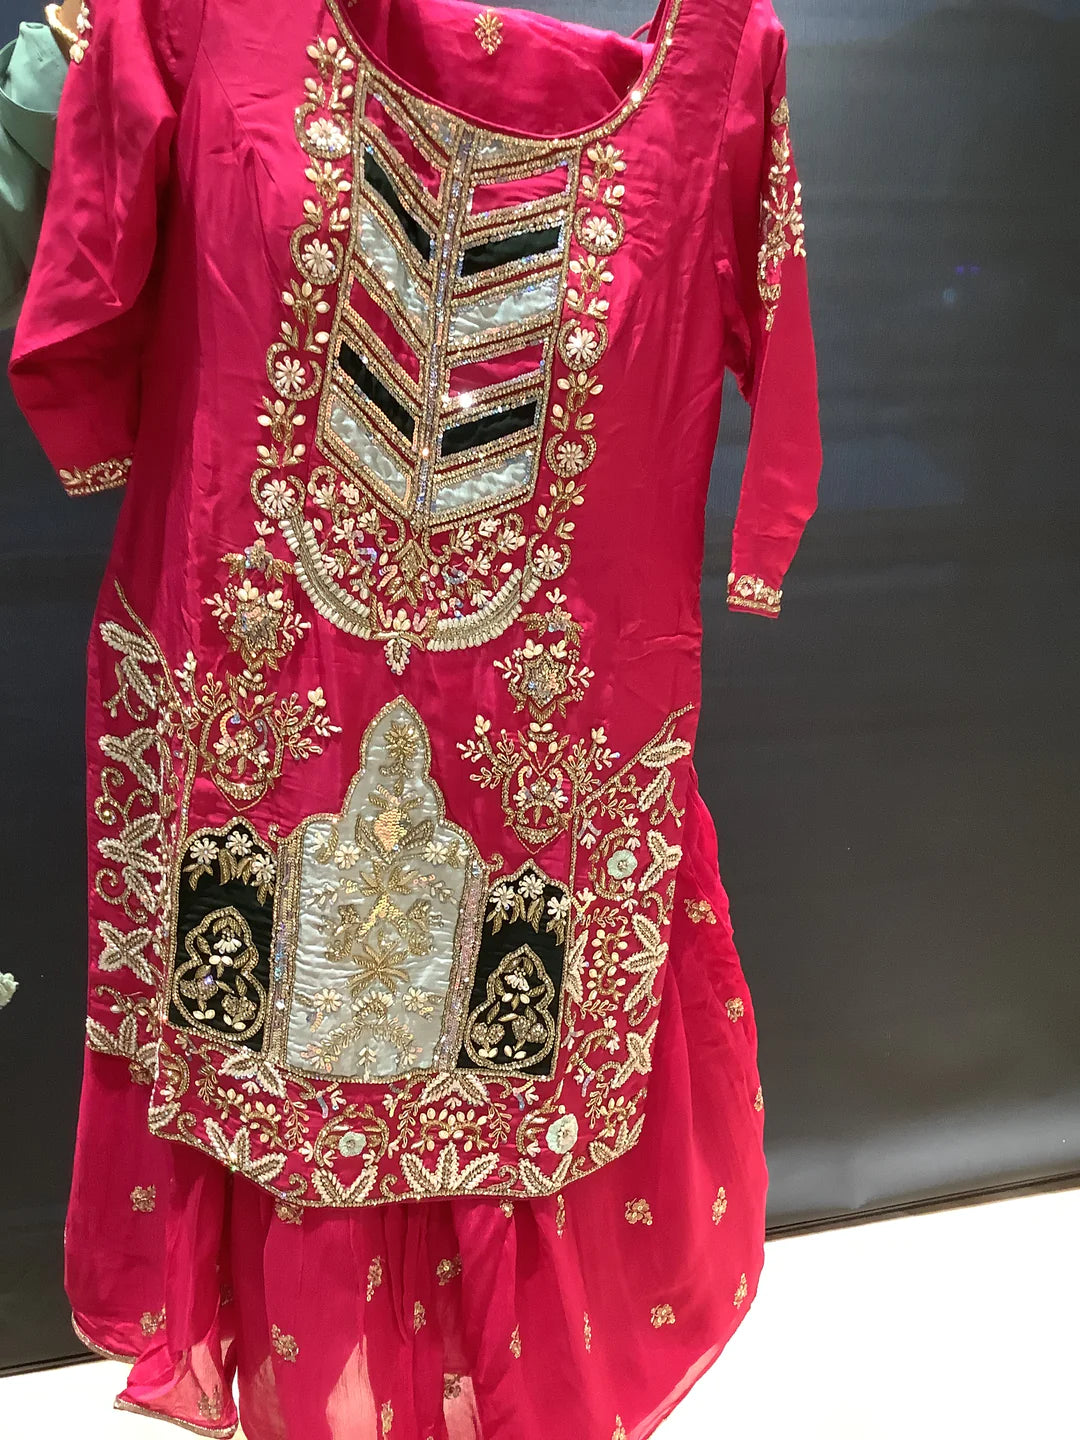 heavily embroidered hot pink gharara outfit.